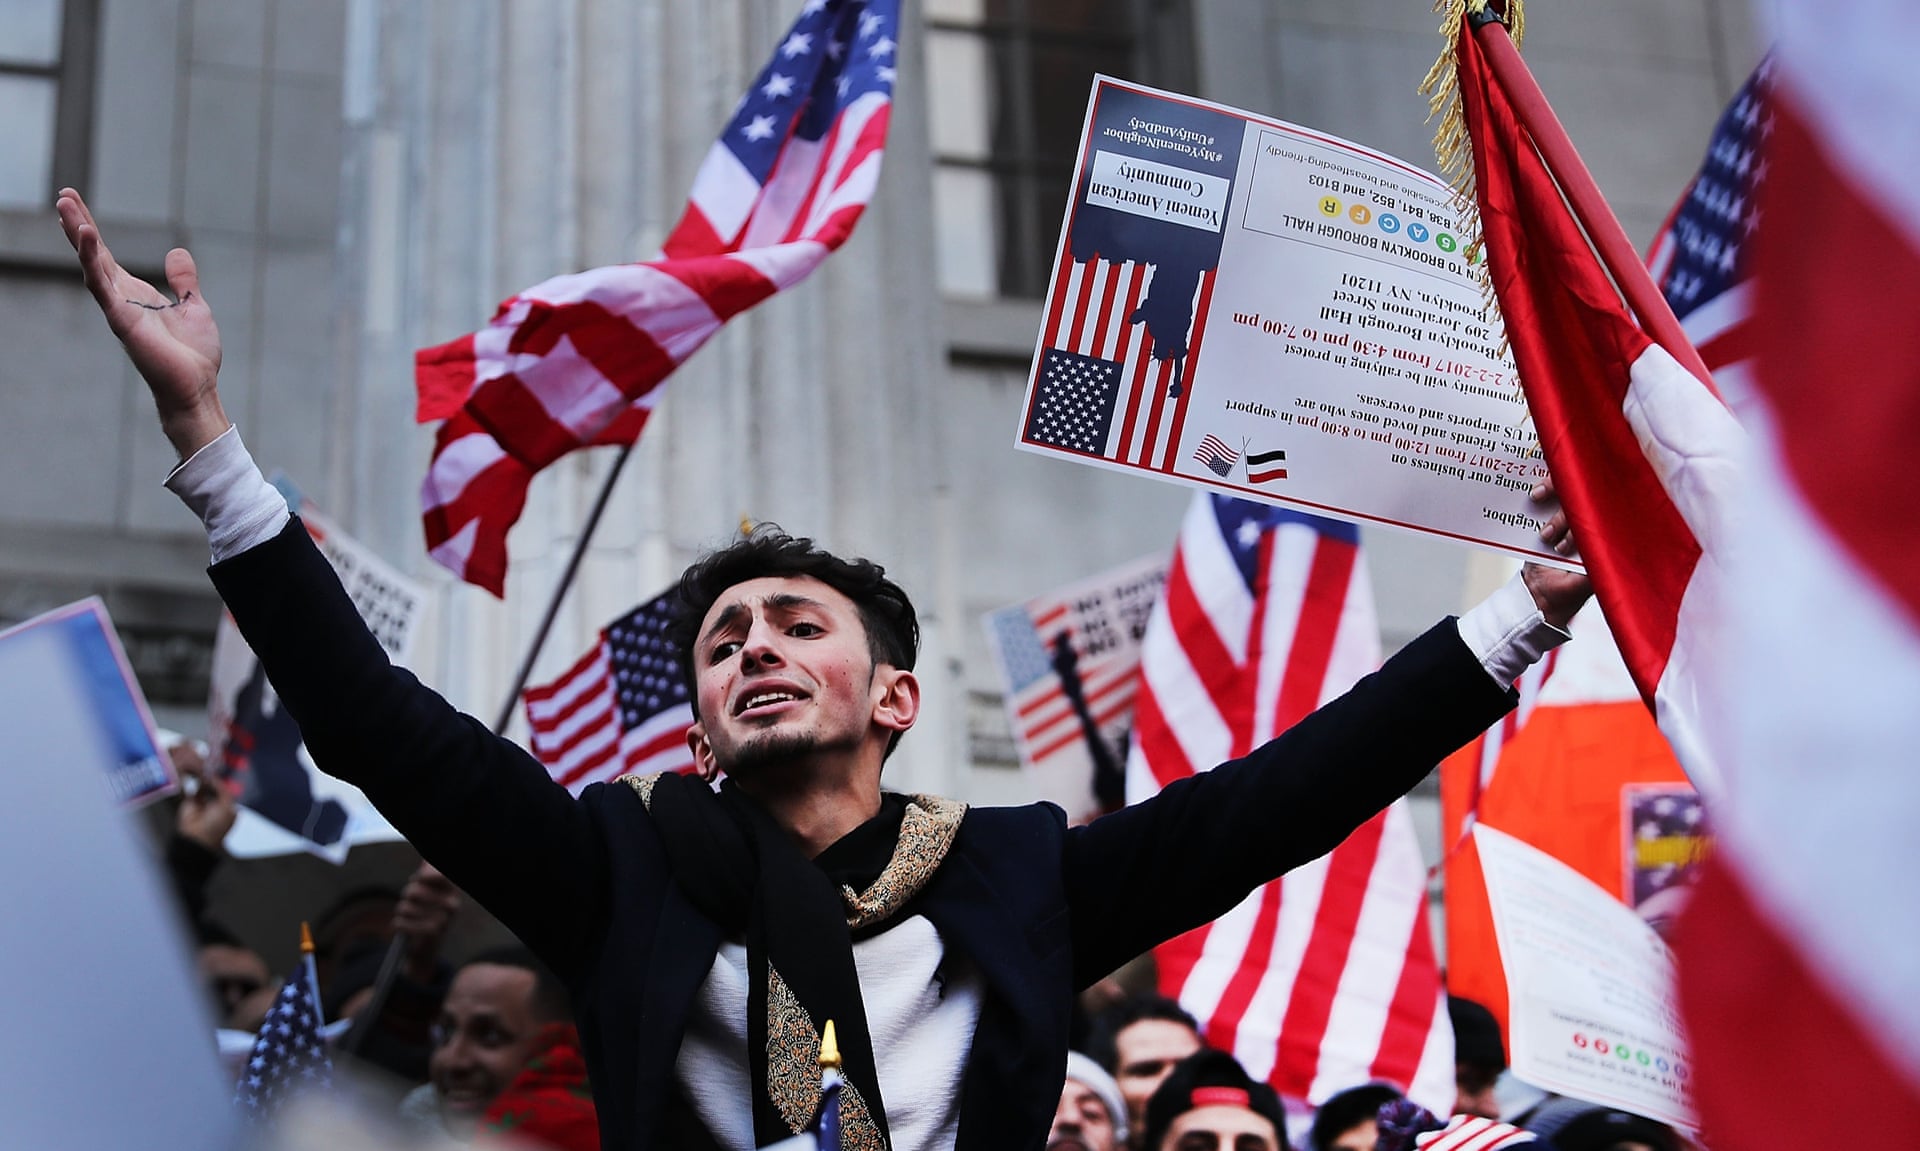 Yemenis and supporters protest against Donald Trump’s executive order temporarily banning immigrants and refugees from seven Muslim-majority countries, including Yemen on 2 February 2017 in Brooklyn. Photograph: Spencer Platt/Getty Images